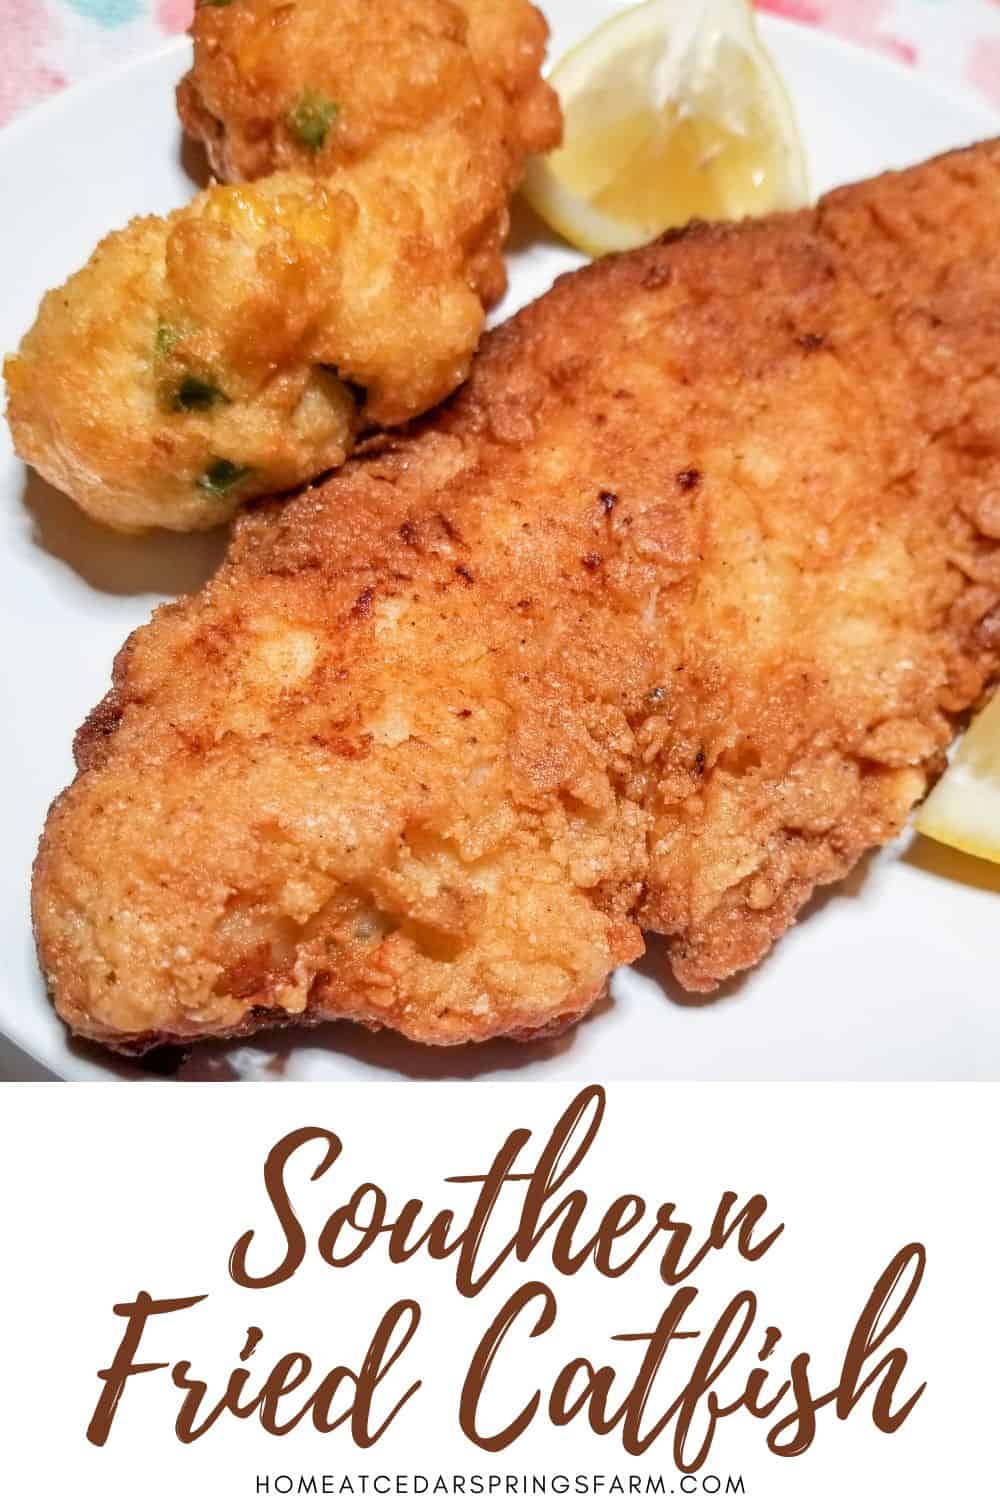 Southern Fried Catfish with hushpuppies and lemon slices on a white plate with text overlay.